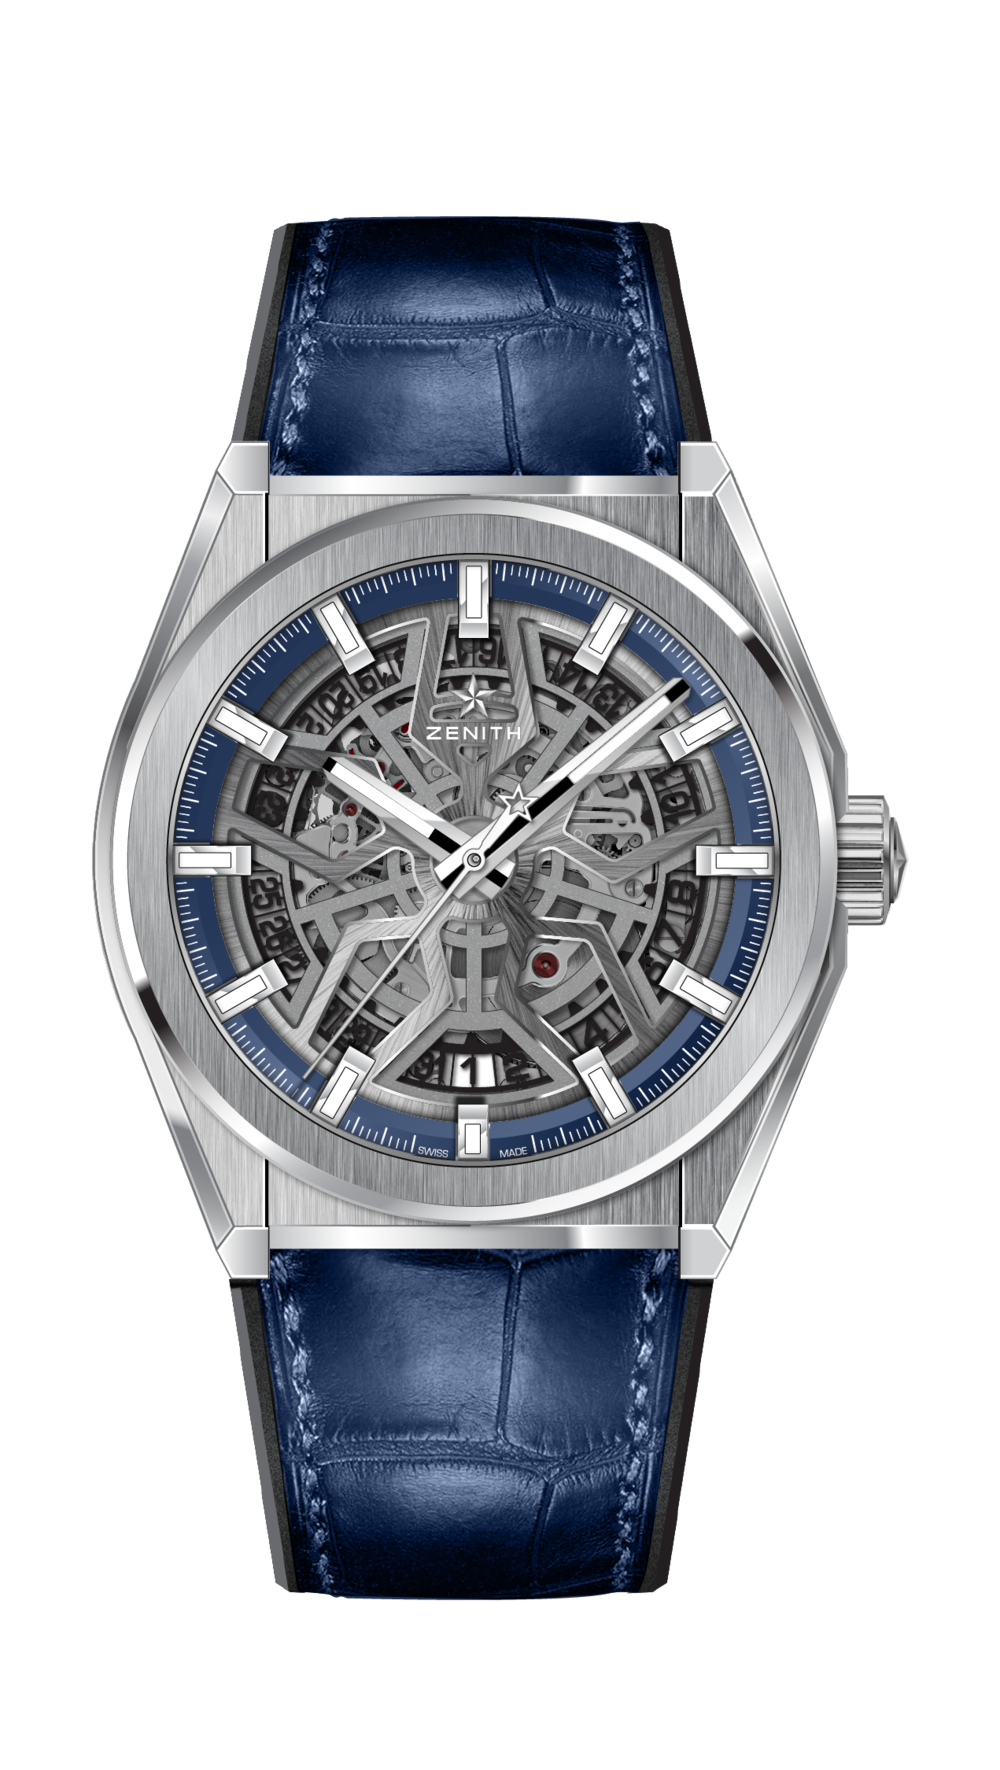 Showing at WatchTime New York 2018: Zenith Defy Classic Collection